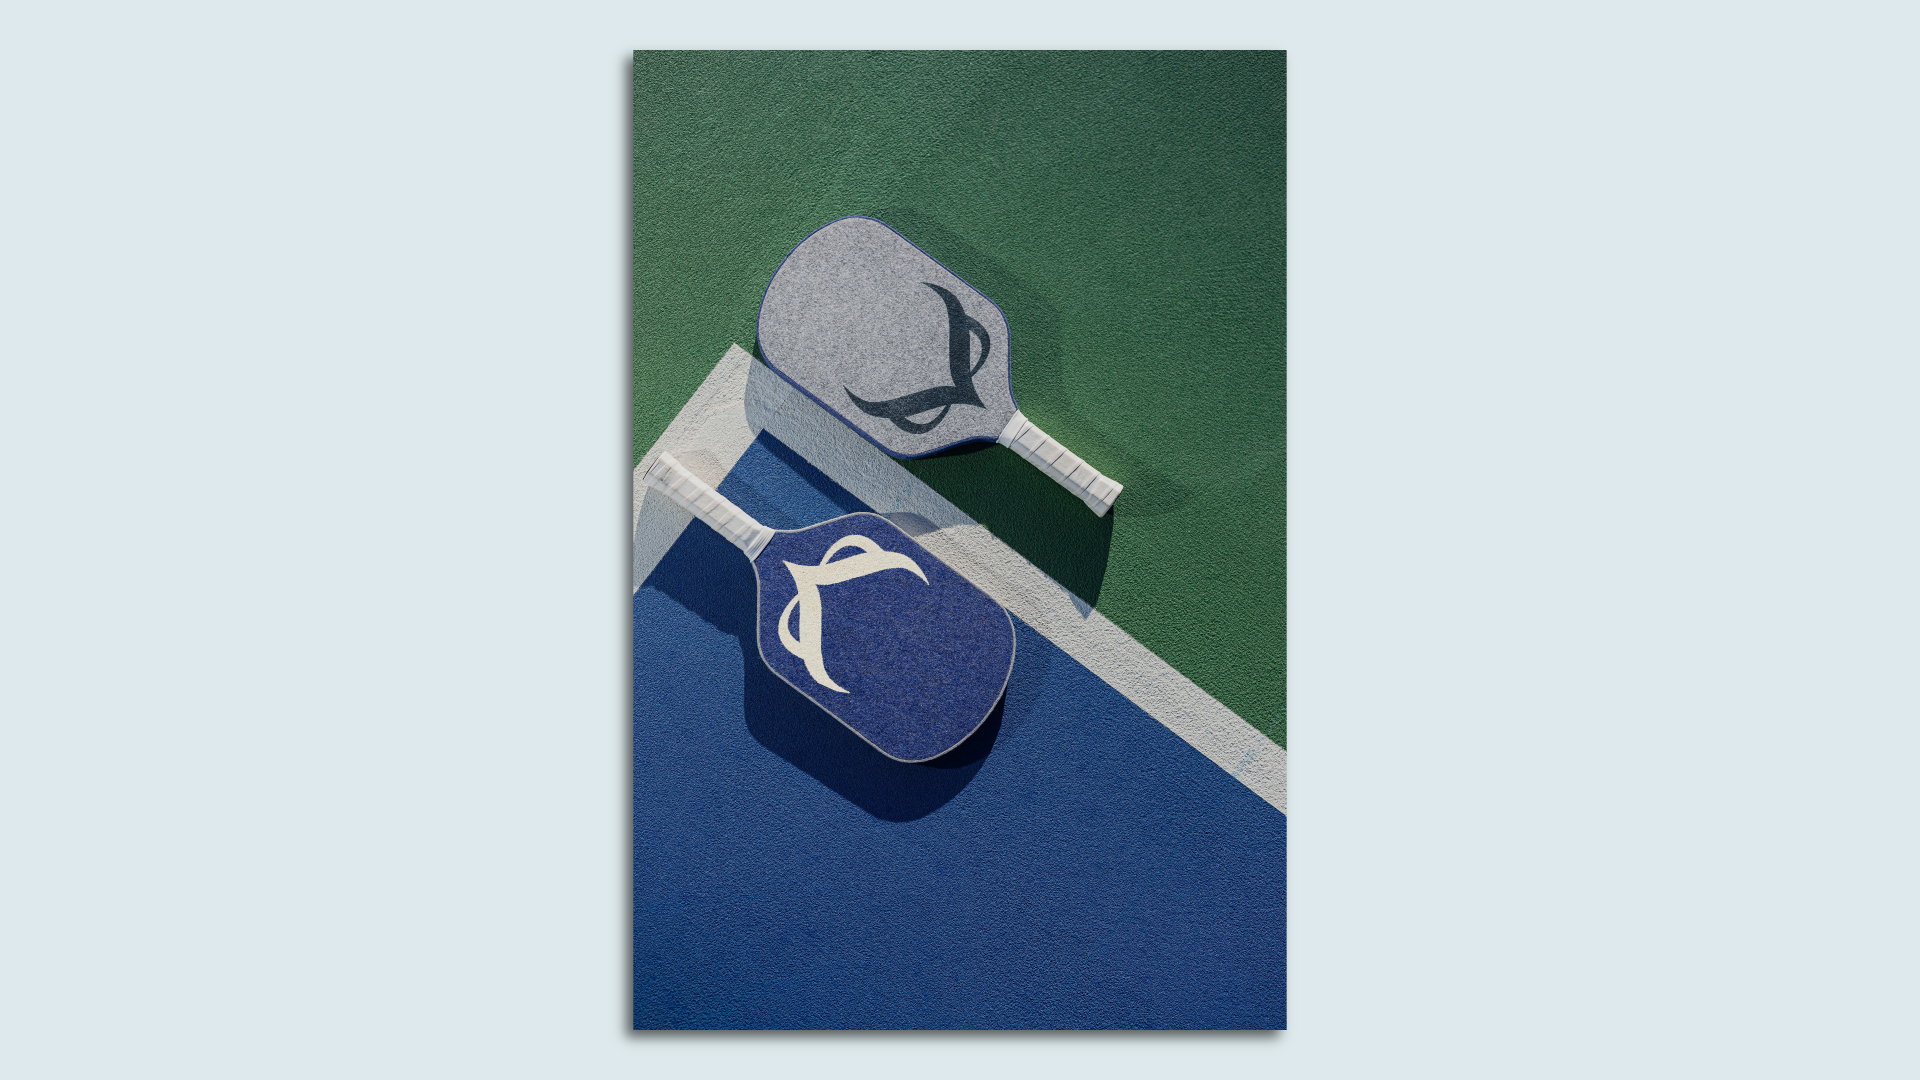 Two pickleball paddles laid out on a playing court.